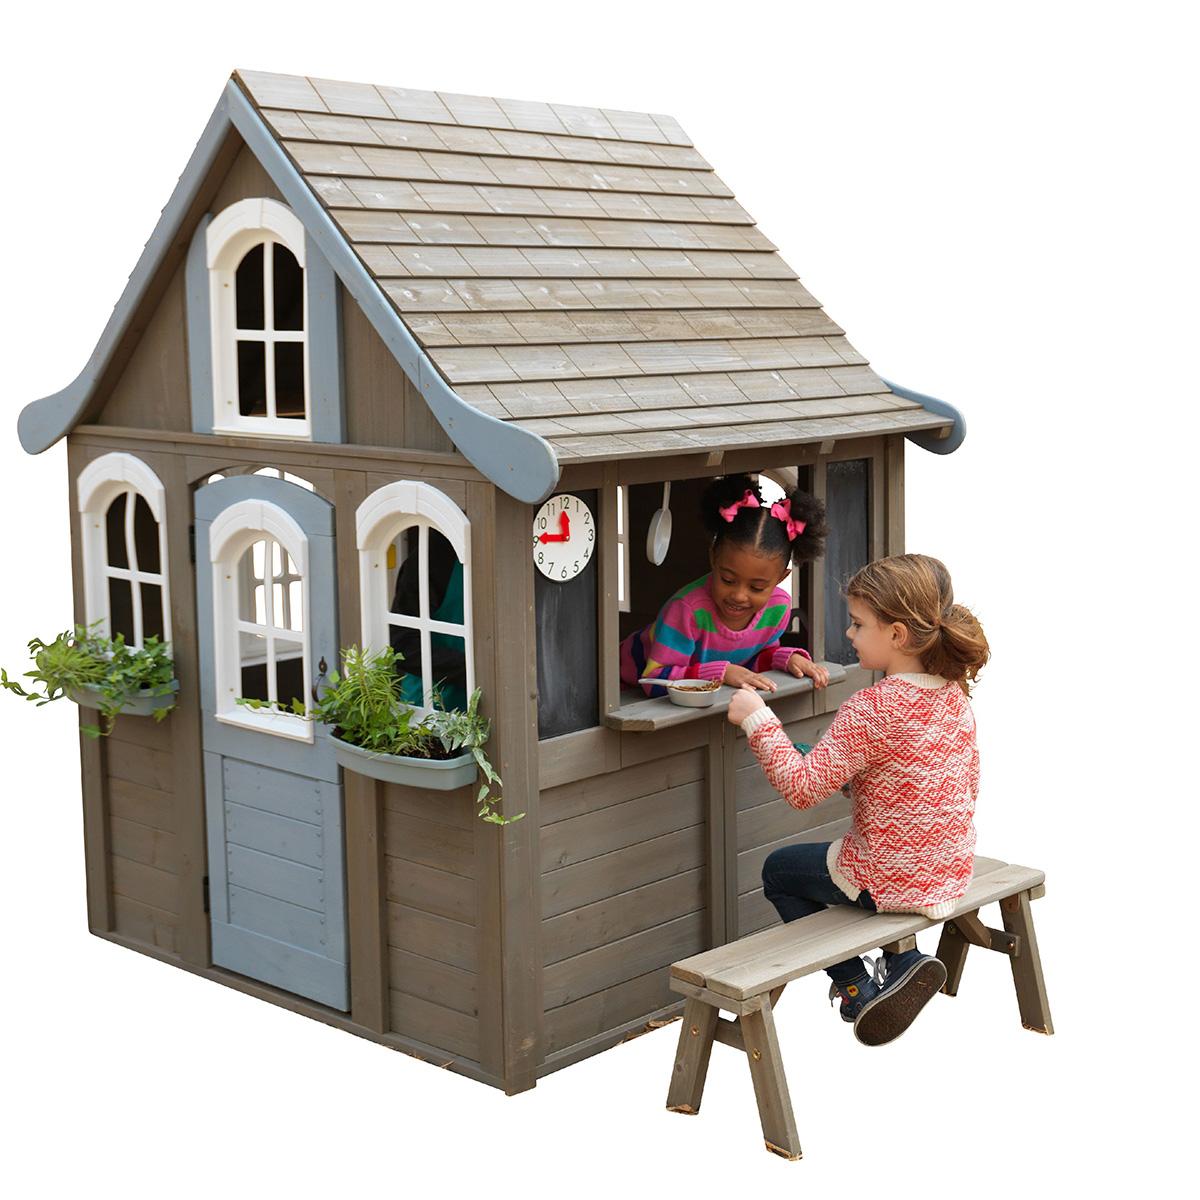 KidKraft Forestview II Kids Wooden Playhouse for $239 Shipped